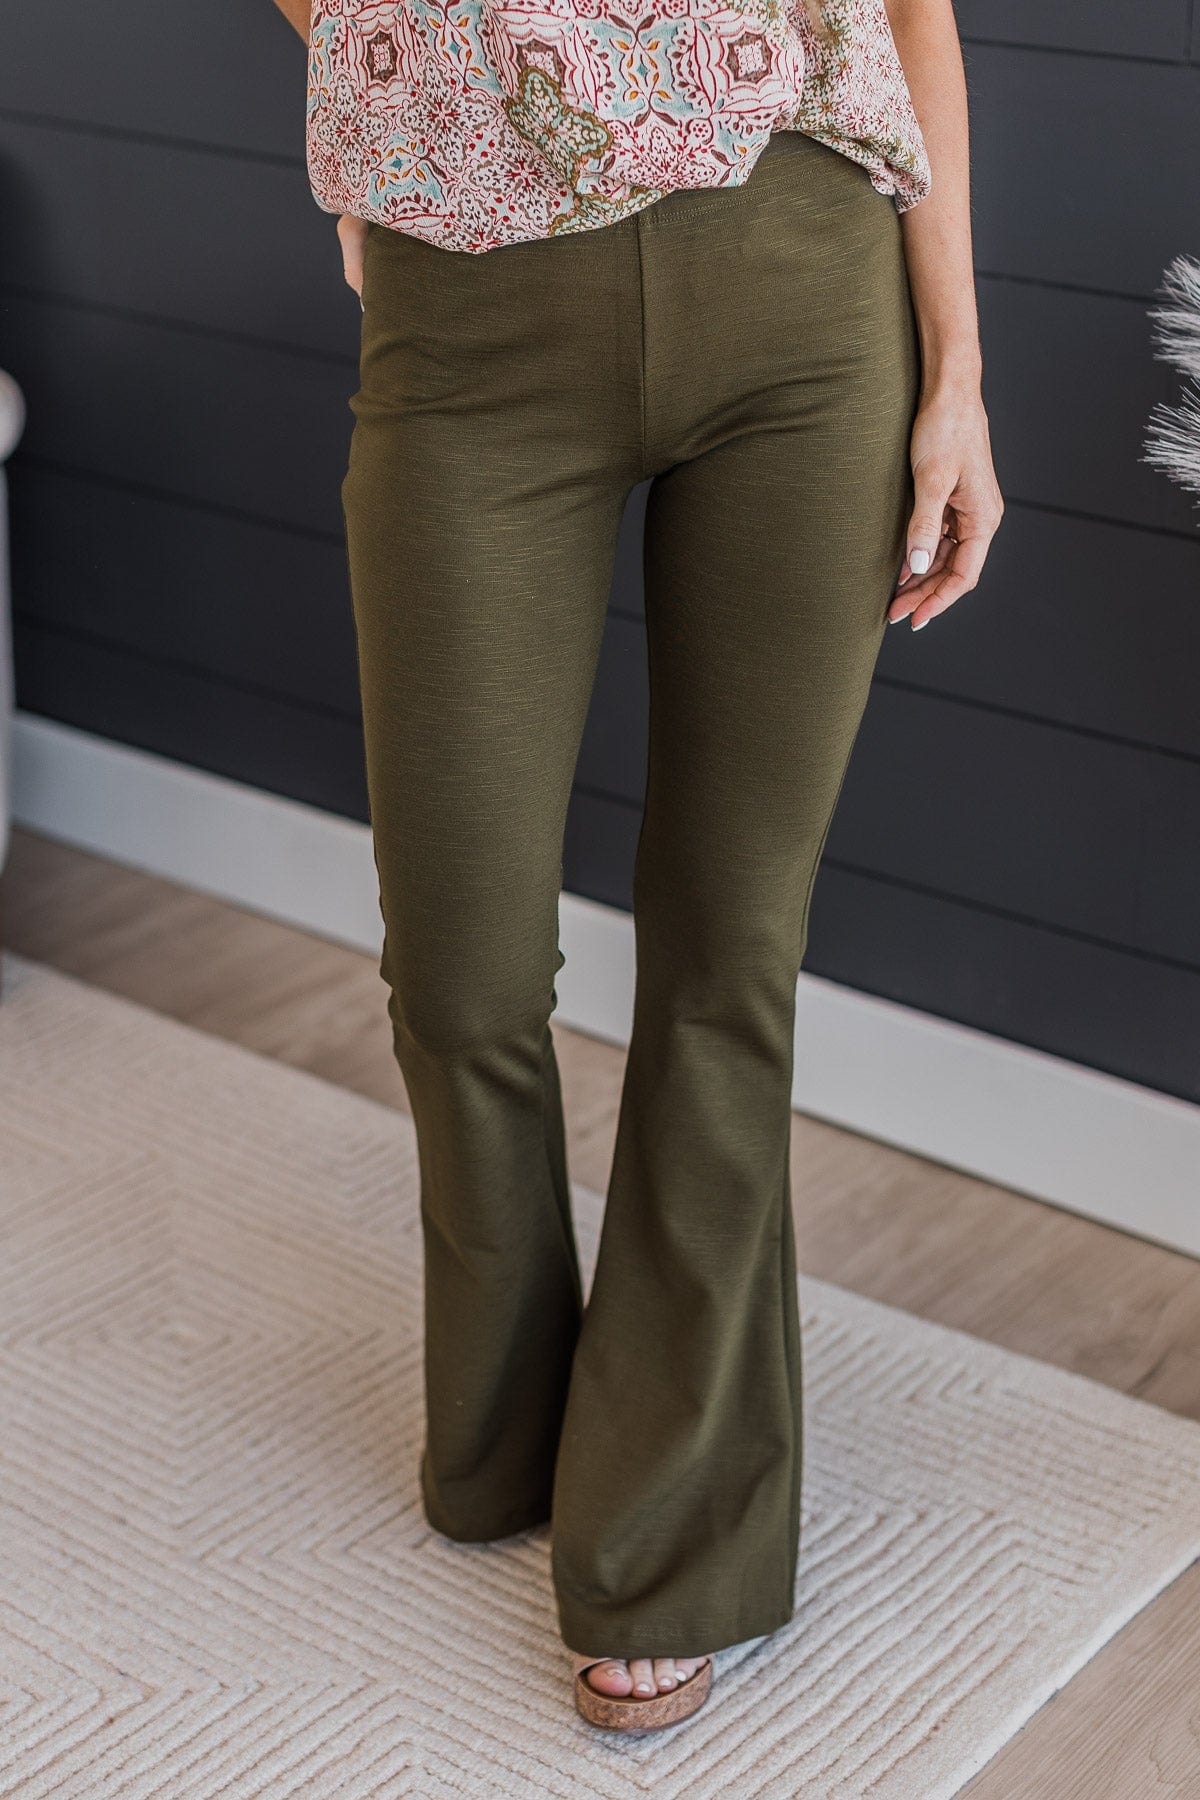 One Foot Forward Knit Flare Pants- Dark Olive